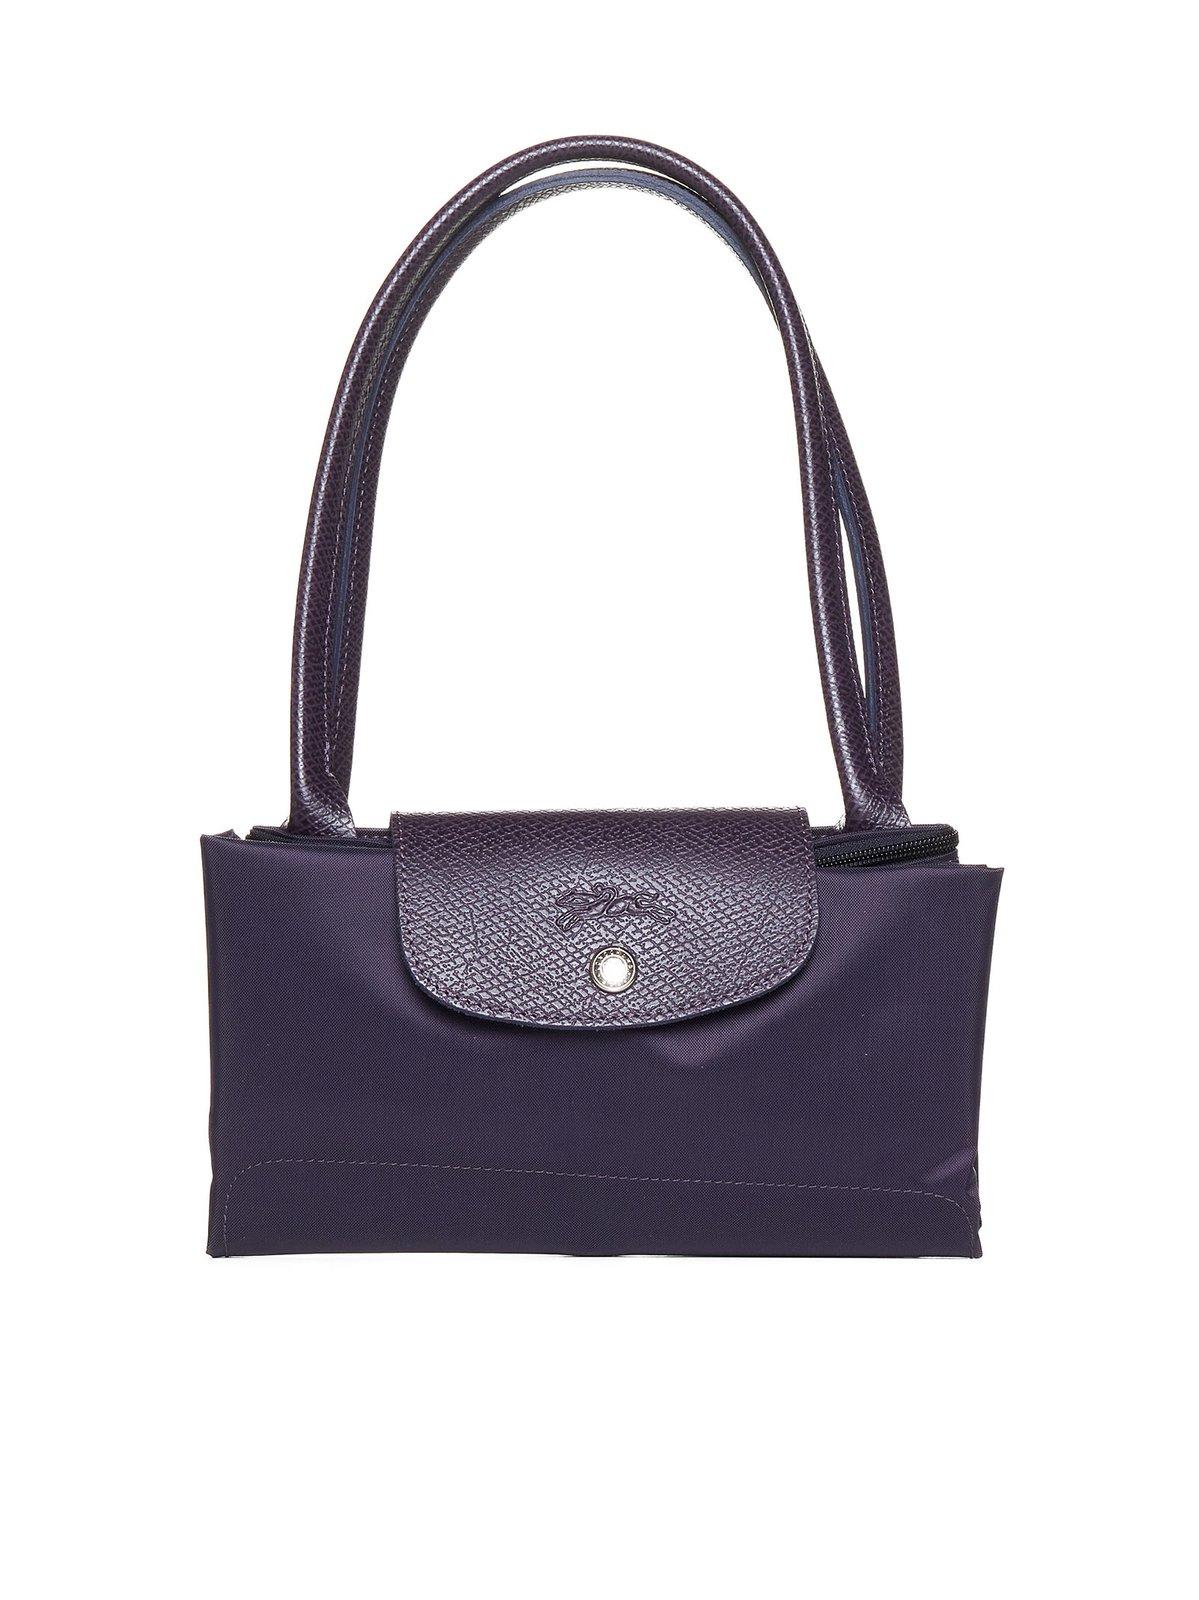 Longchamp Le Pliage Small Tote Bag In Blueberry